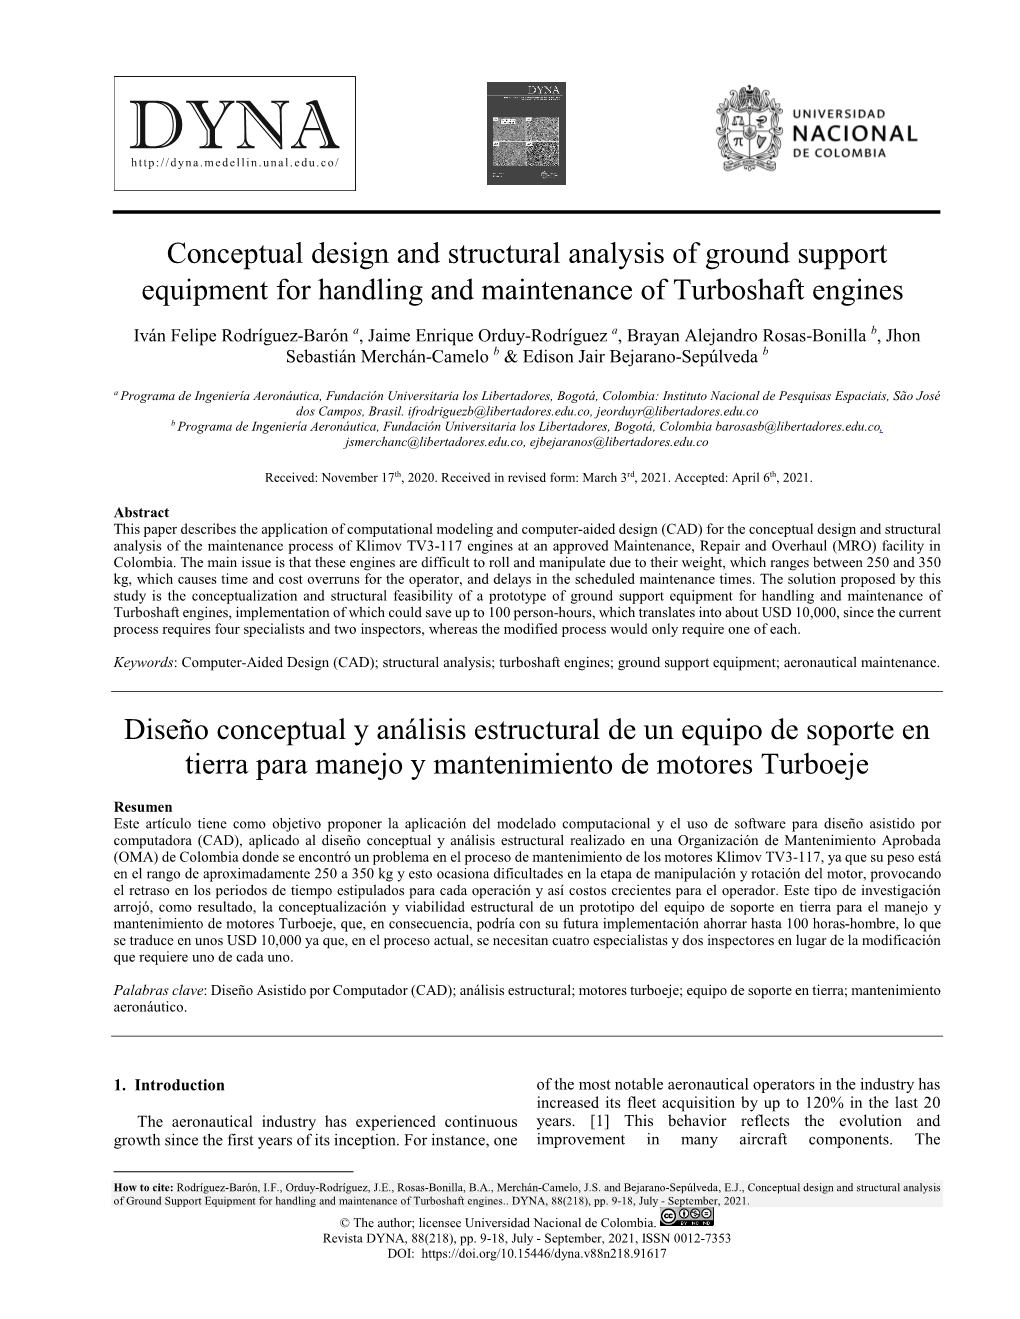 Conceptual Design and Structural Analysis of Ground Support Equipment for Handling and Maintenance of Turboshaft Engines•